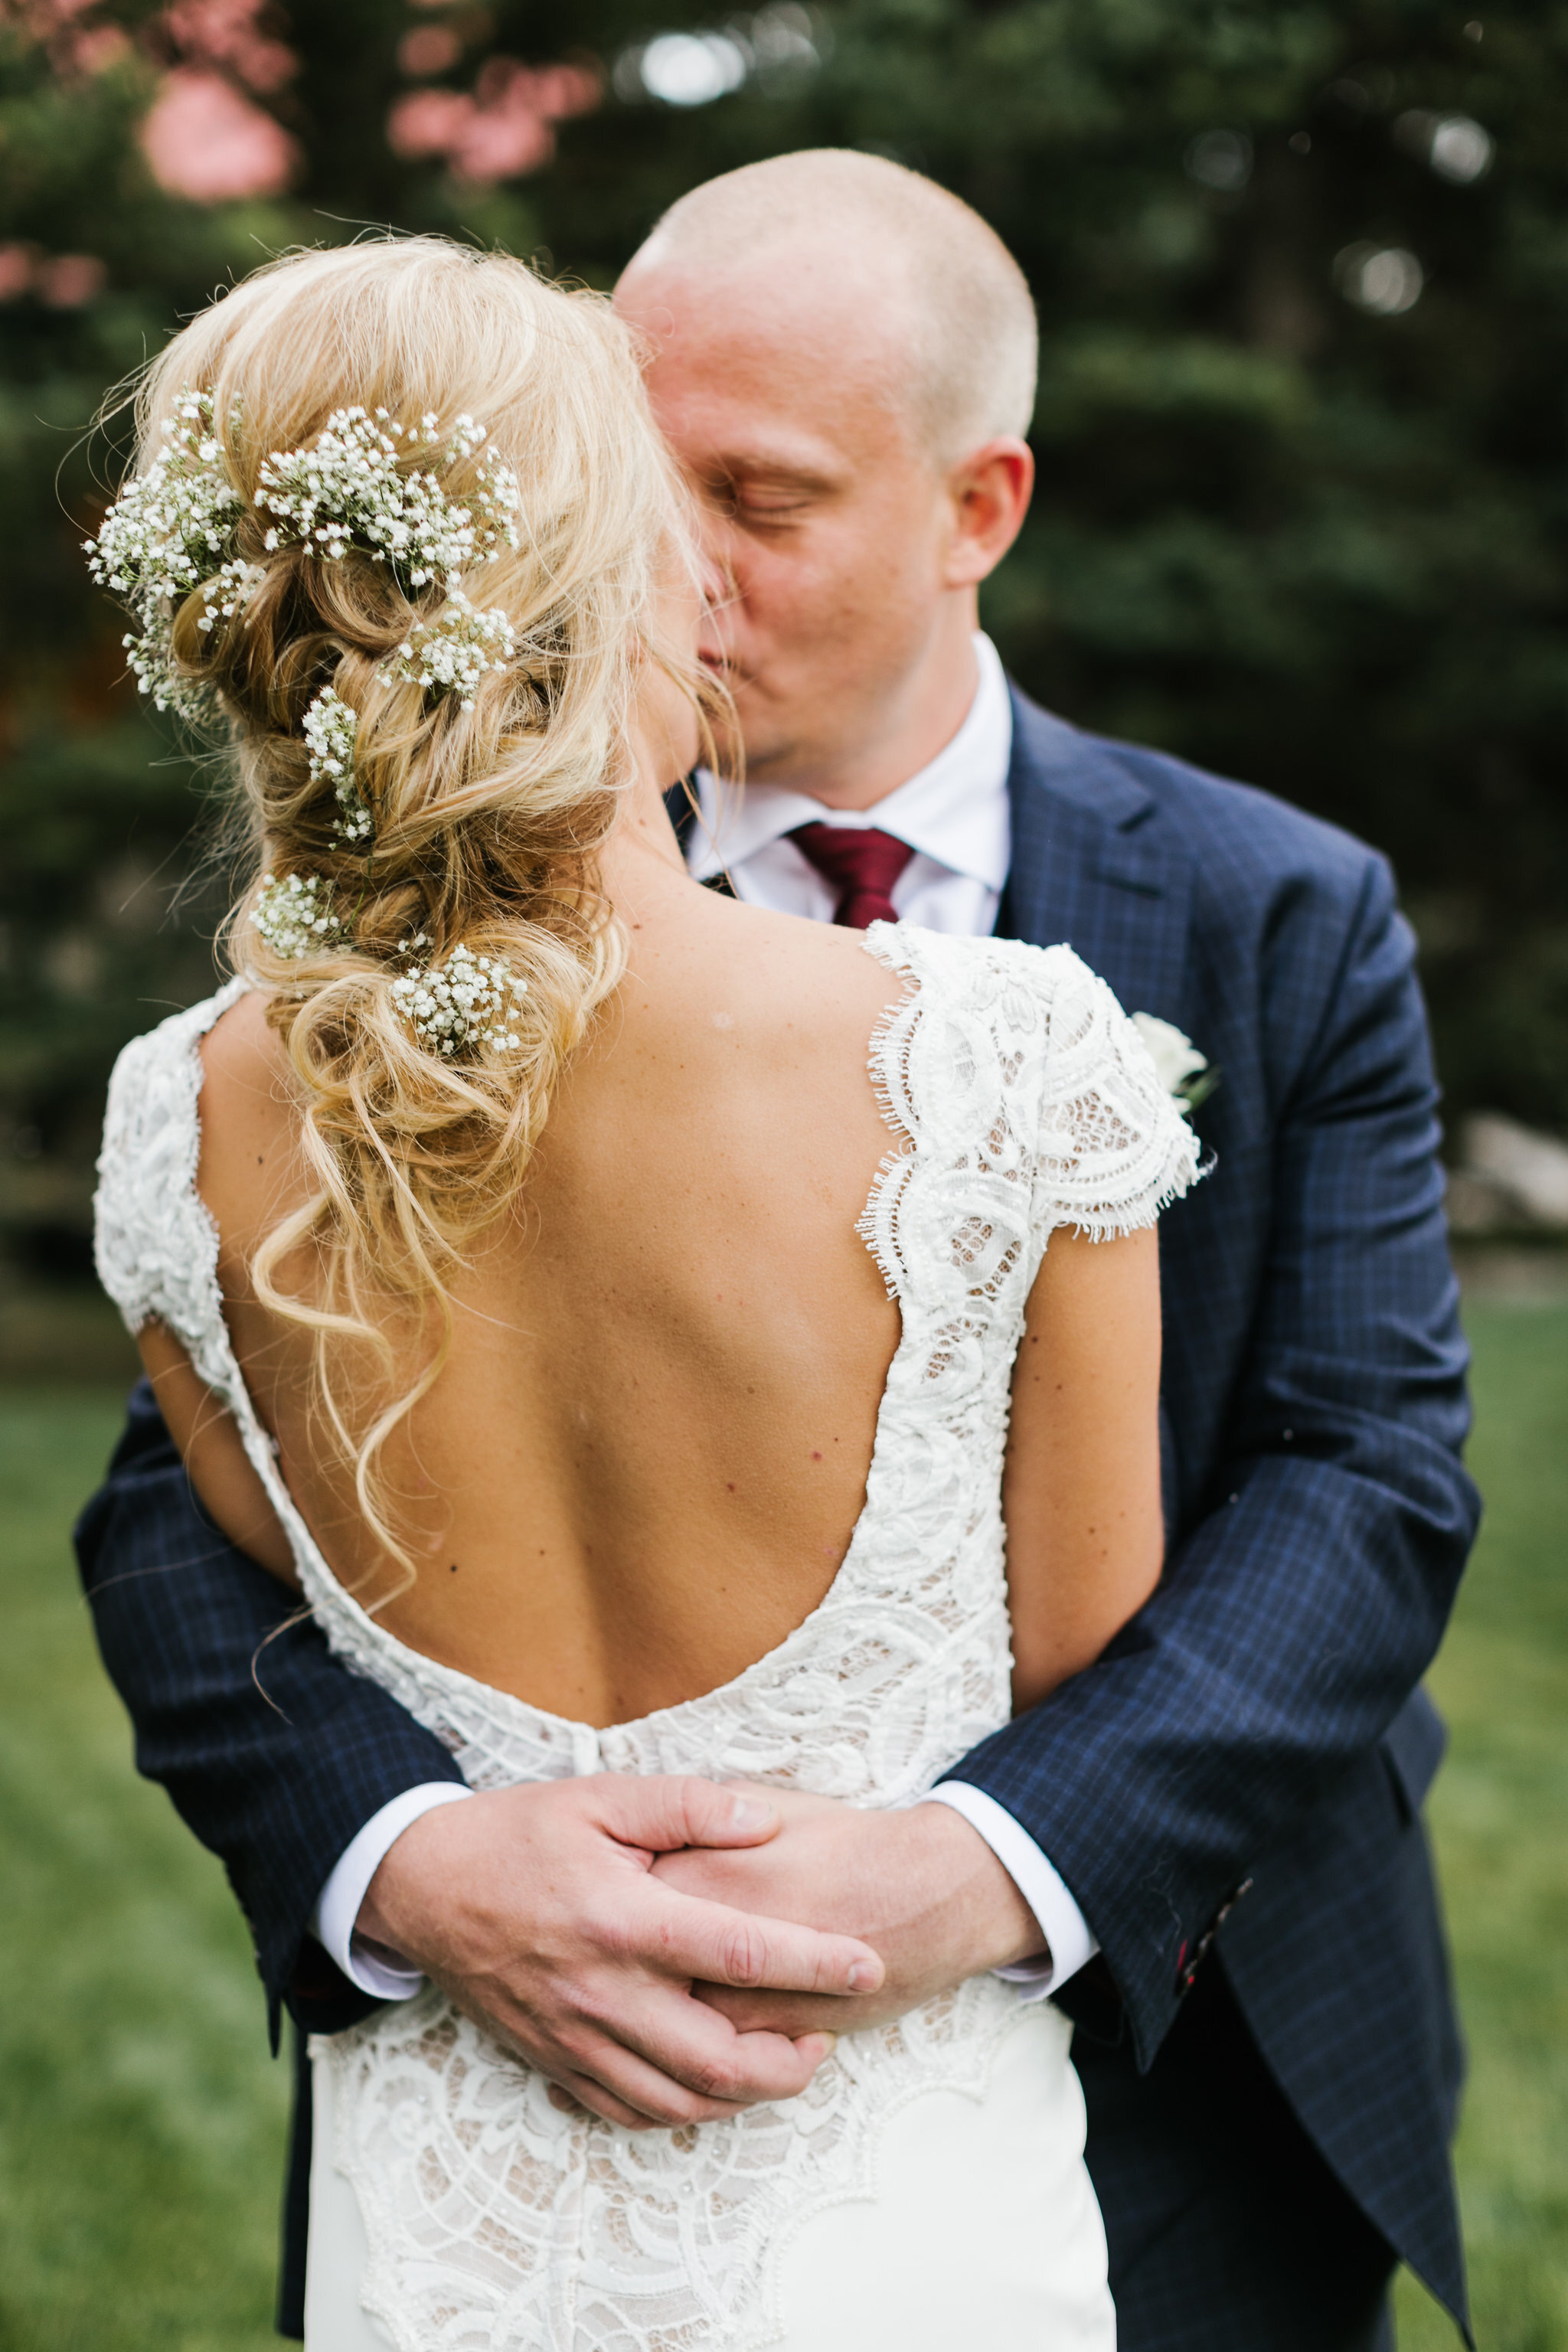 8 Wedding Hairstyles for the Boho Bride // Let's Get Local